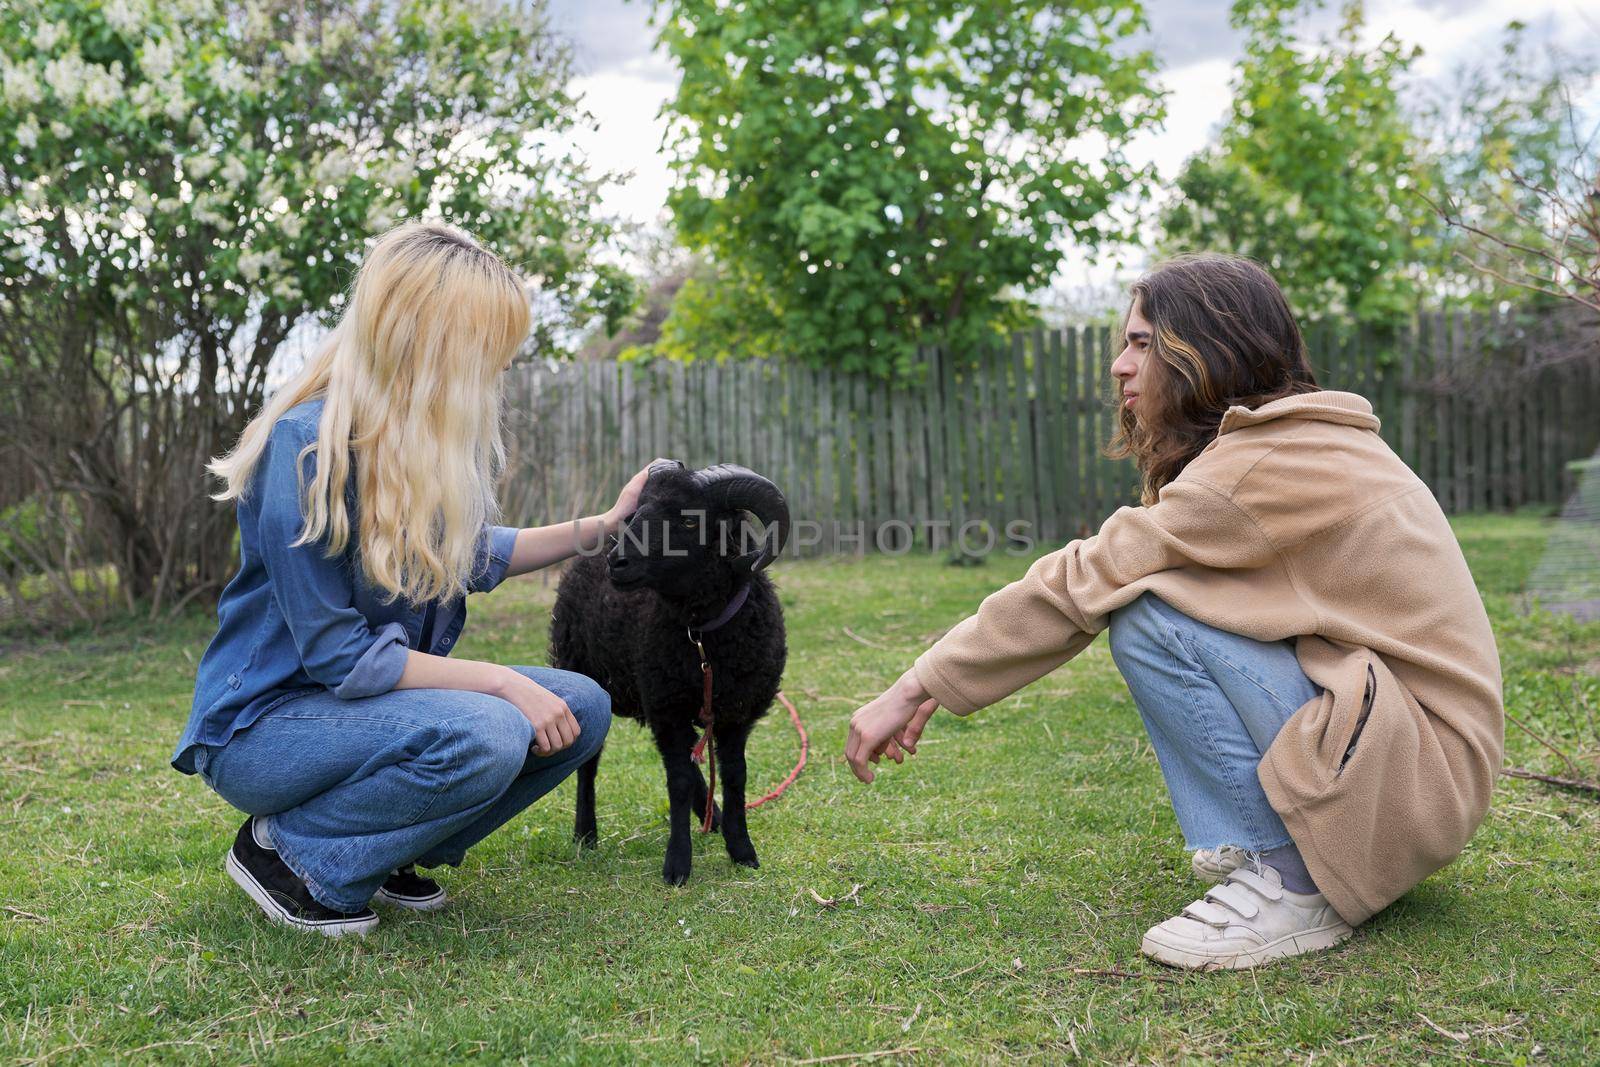 Rustic style, countryside, small animal farm, a couple of teenagers play touching a black ram grazing on the lawn in garden.